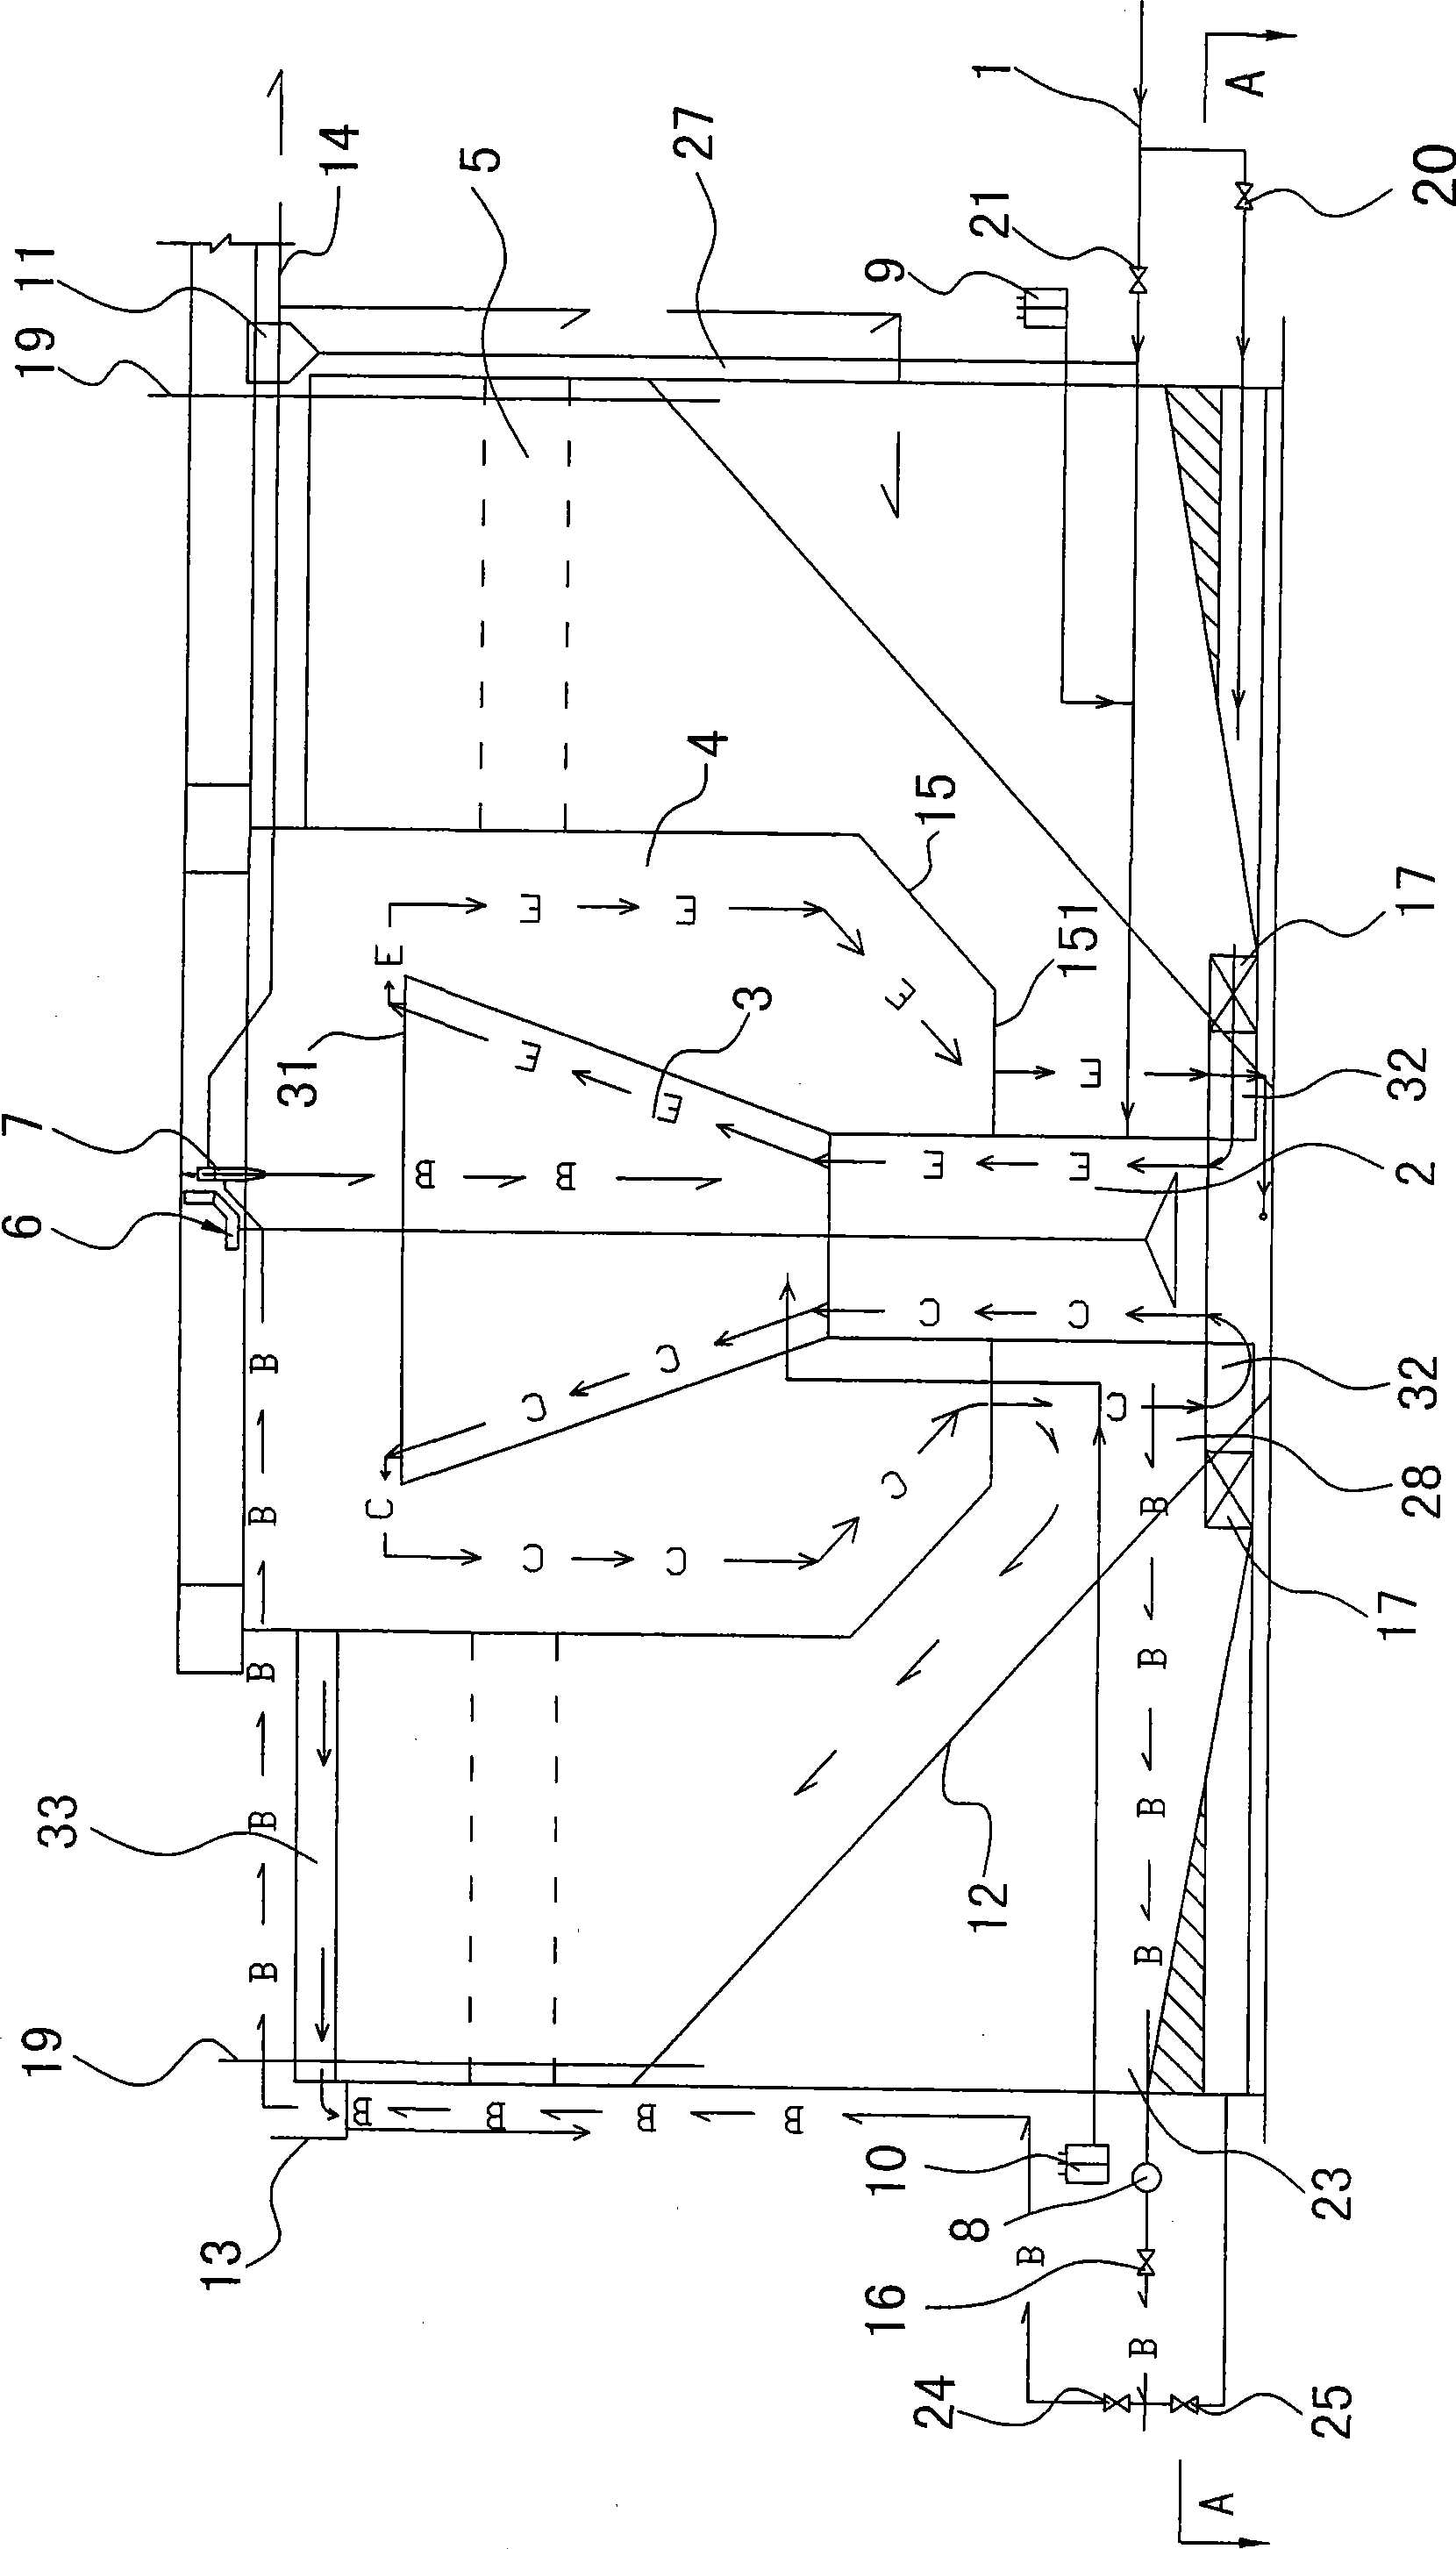 Core-three-circulation combined water treatment process